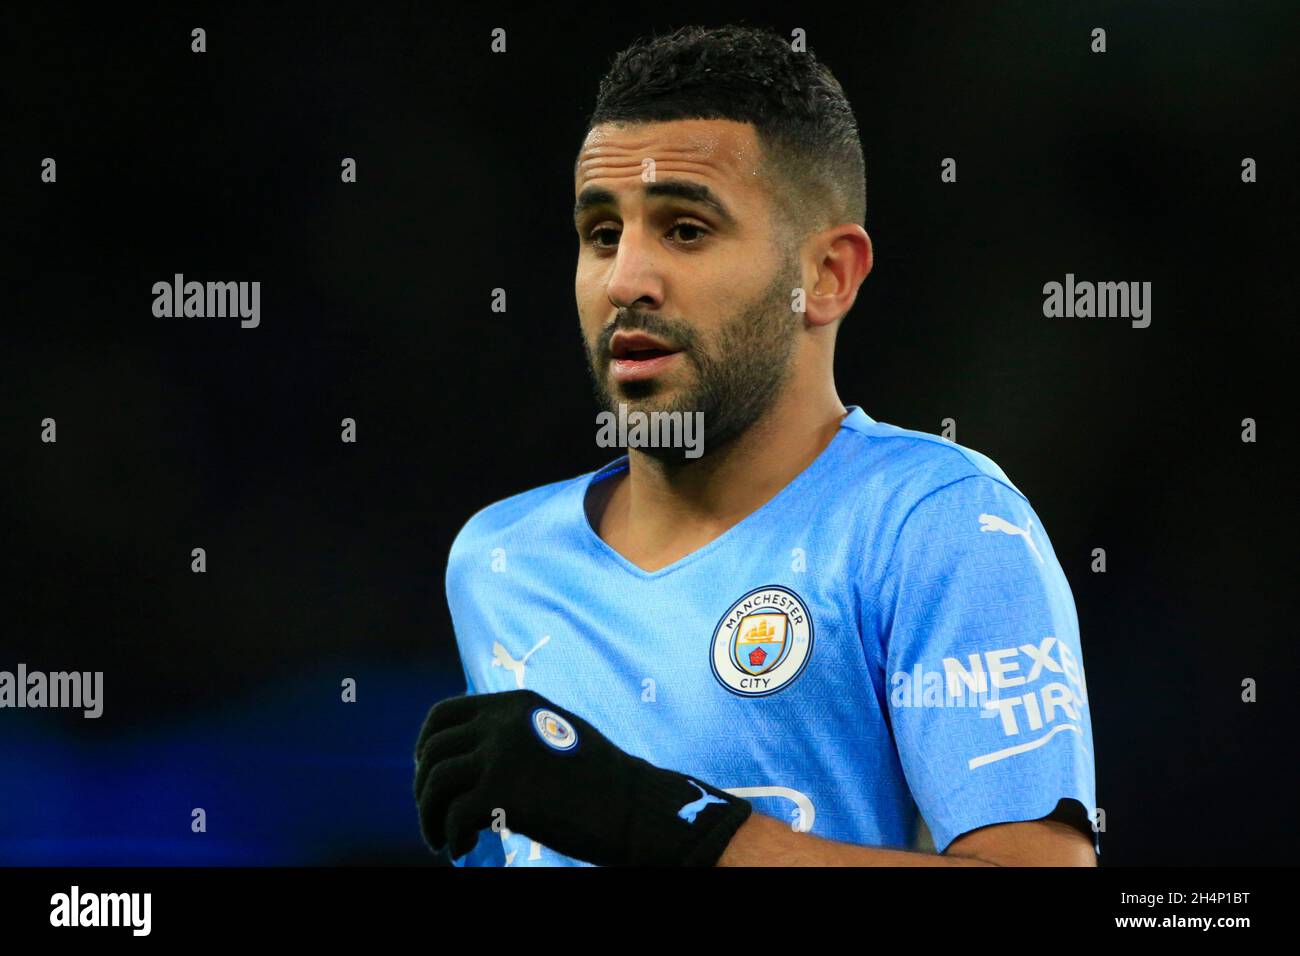 Manchester, UK. 03rd Nov, 2021. Riyad Mahrez #26 of Manchester City in Manchester, United Kingdom on 11/3/2021. (Photo by Conor Molloy/News Images/Sipa USA) Credit: Sipa USA/Alamy Live News Stock Photo